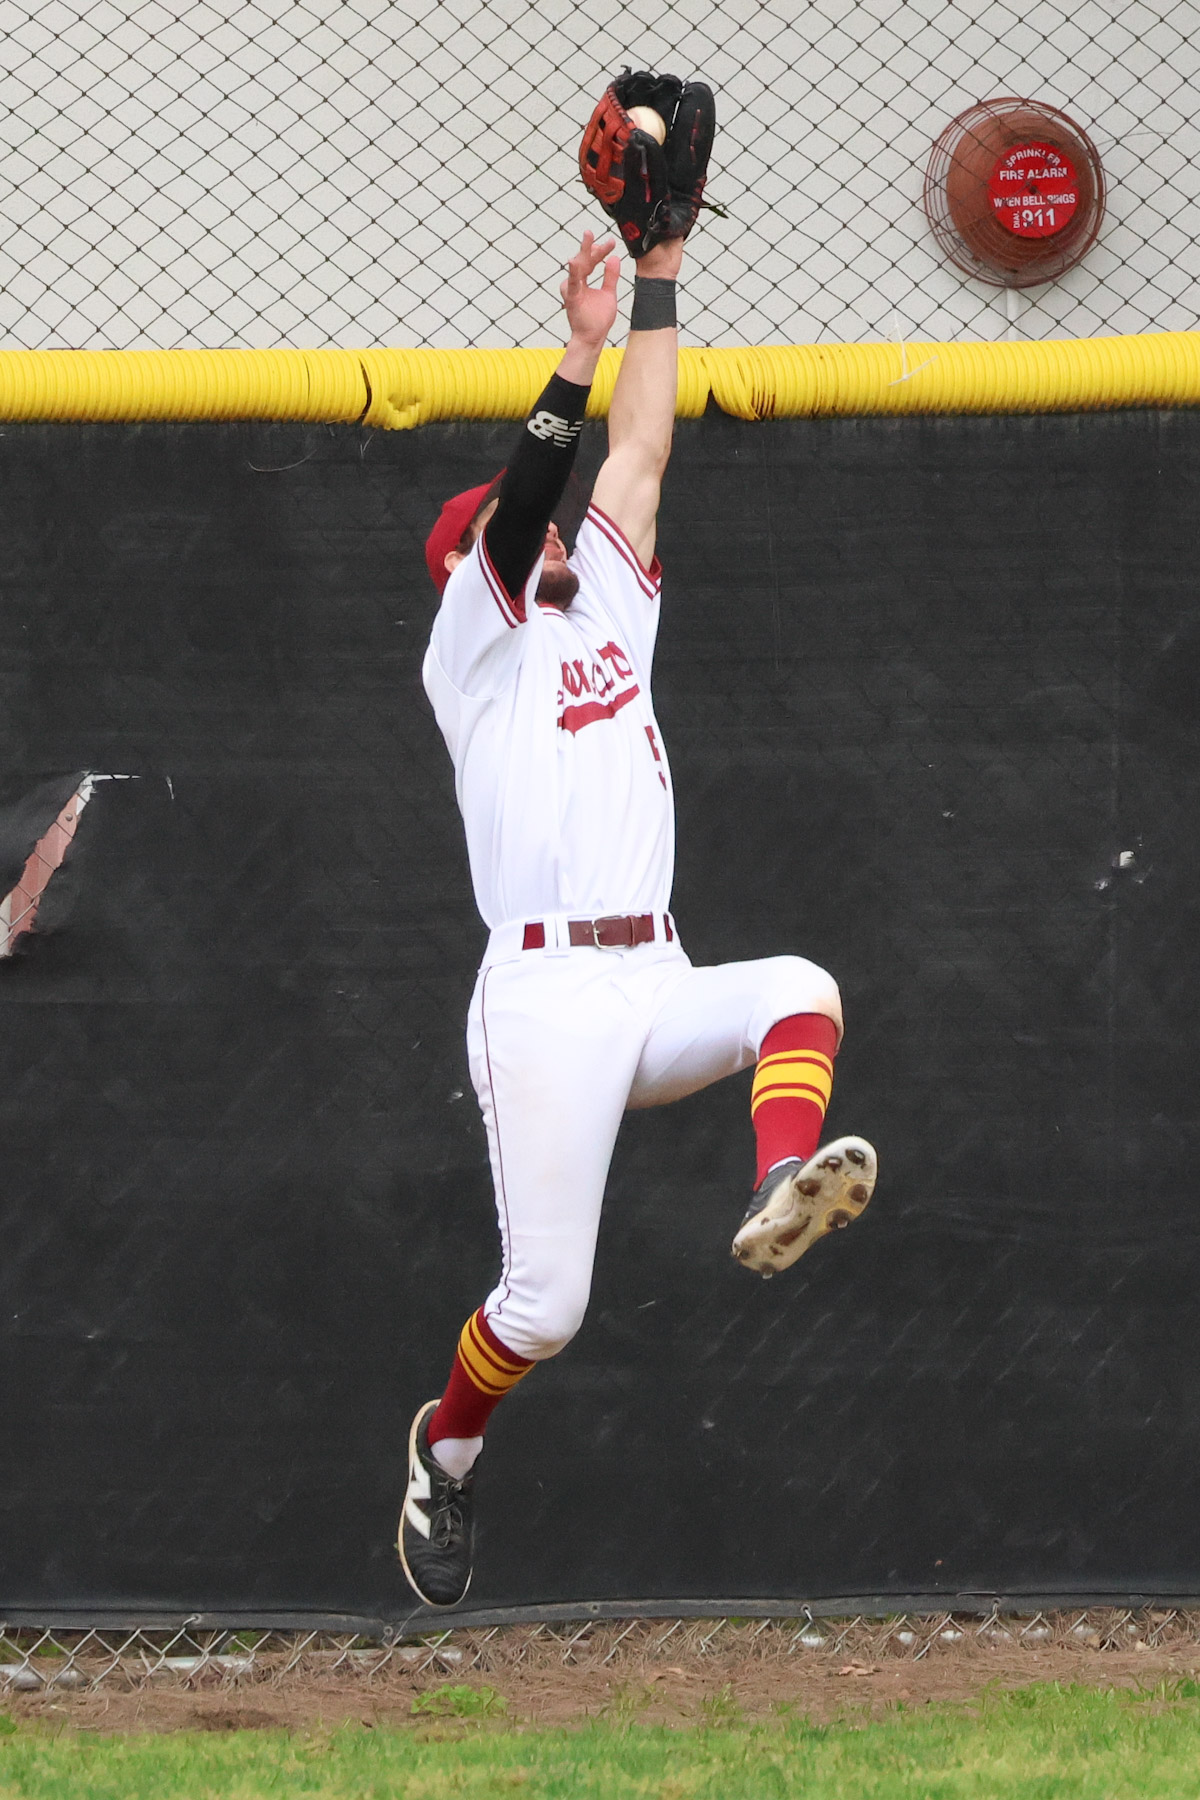 Evan Coad robs a home run during PCC's victory (photo by Richard Quinton).